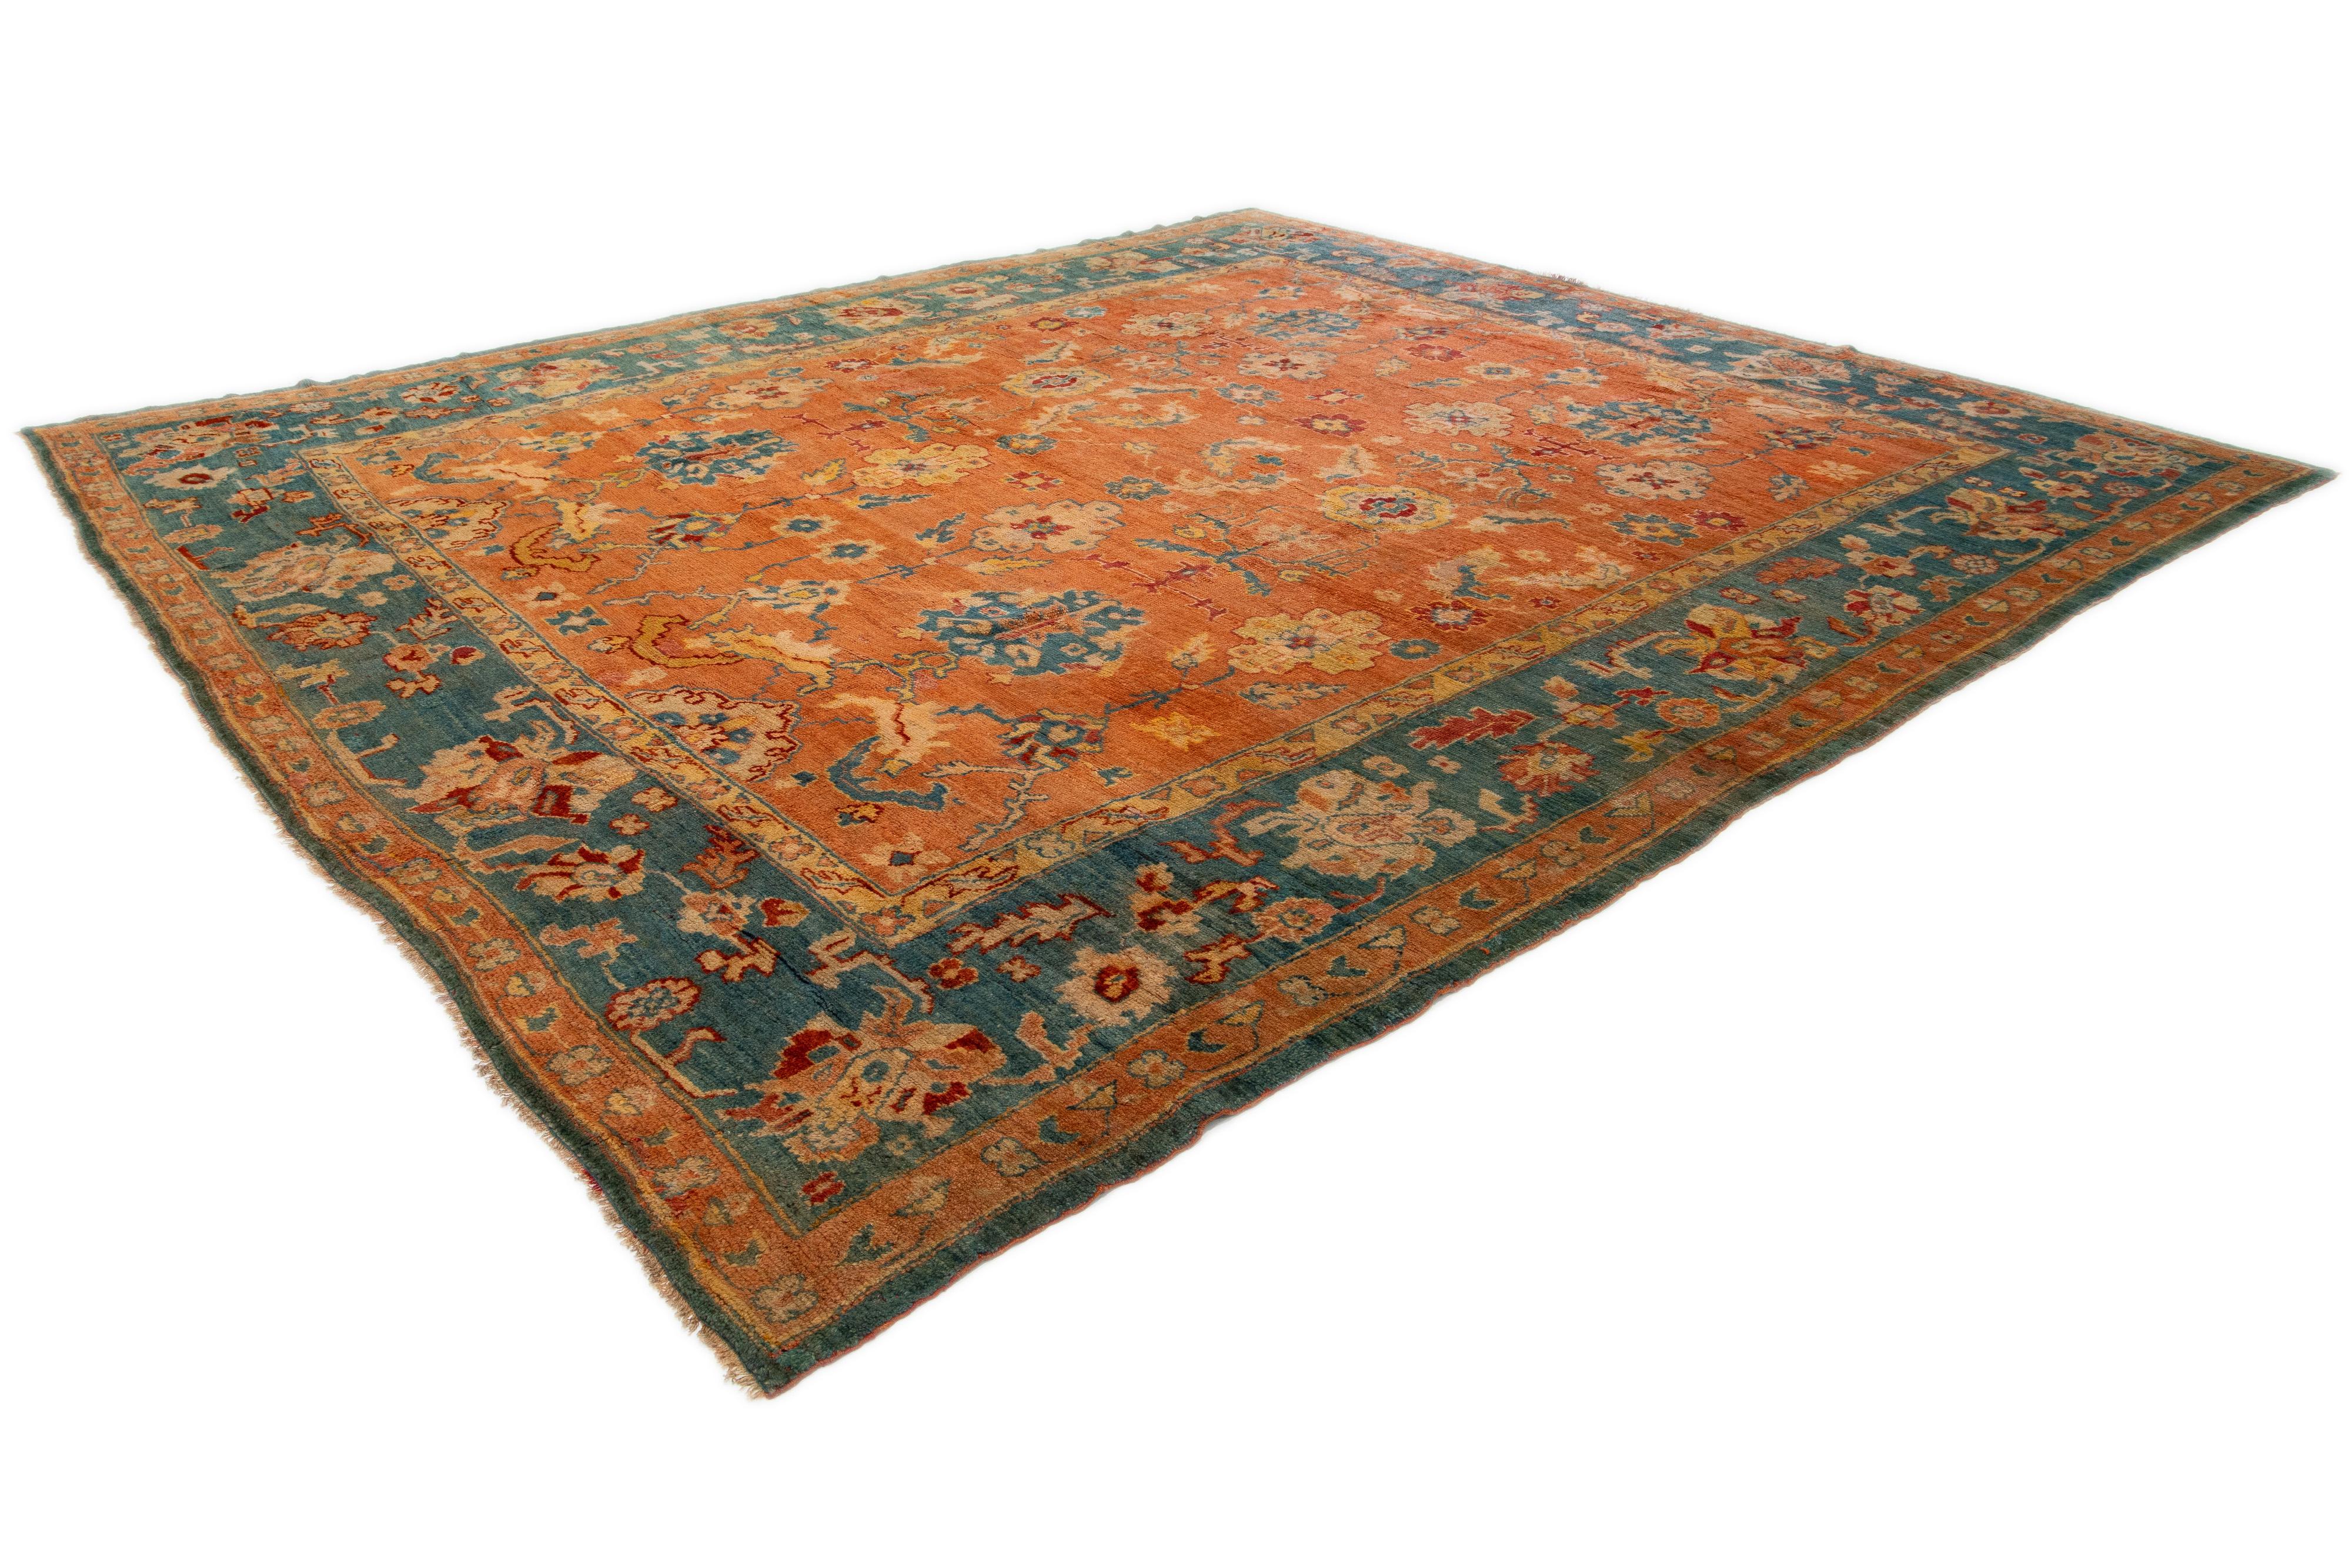 Orange and Blue Antique Turkish Oushak Wool Rug Handmade From the 1880s For Sale 4